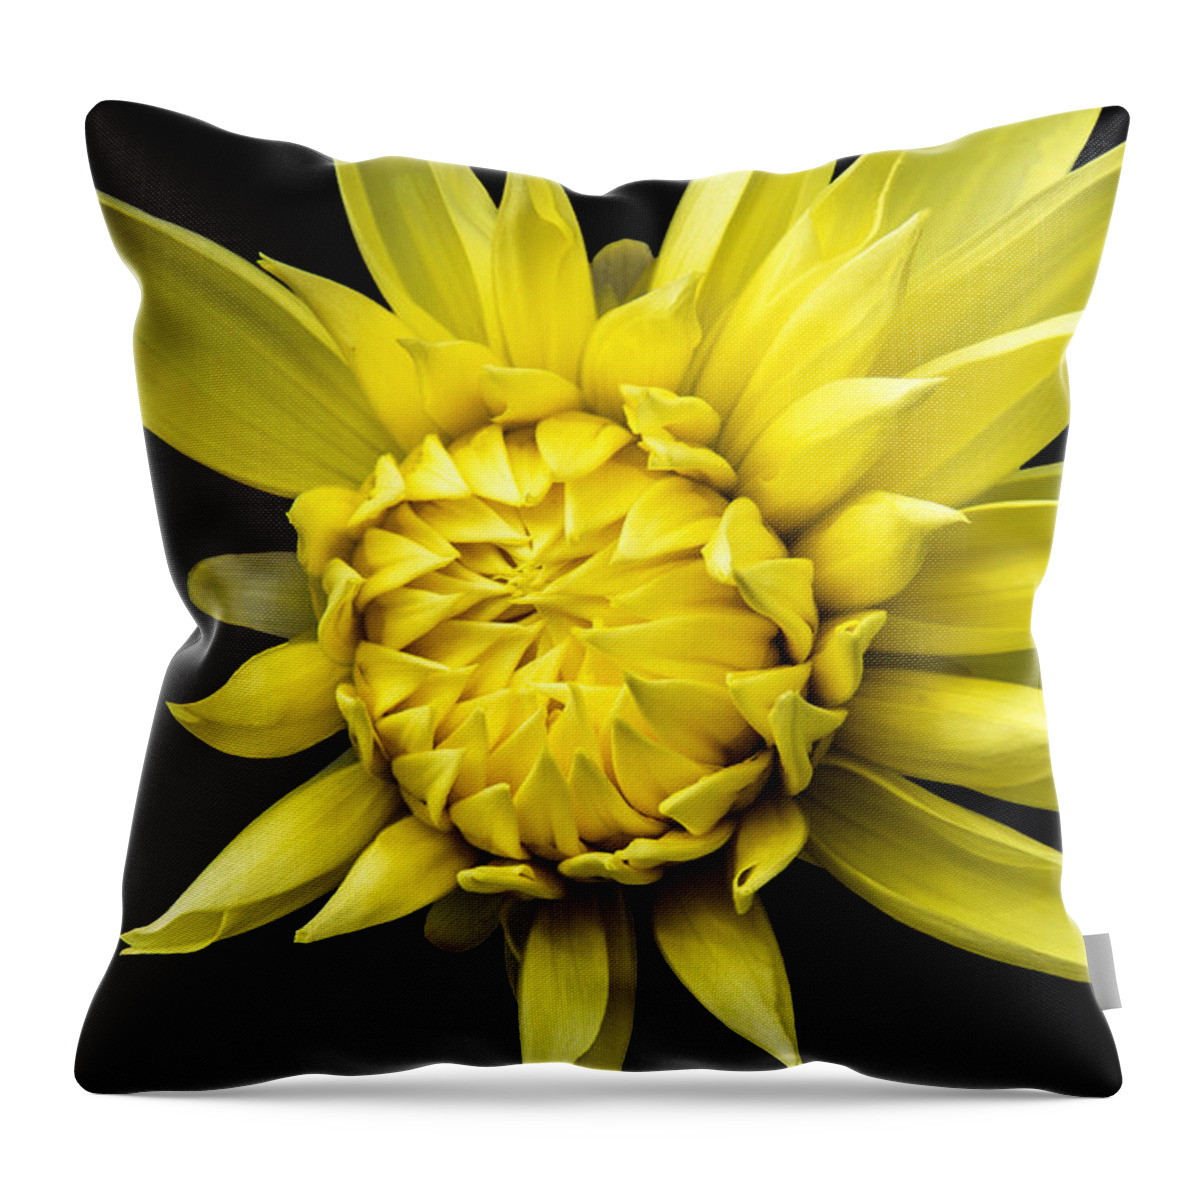 Yellow Flower Throw Pillow featuring the photograph Sunny Prince by Marina Kojukhova